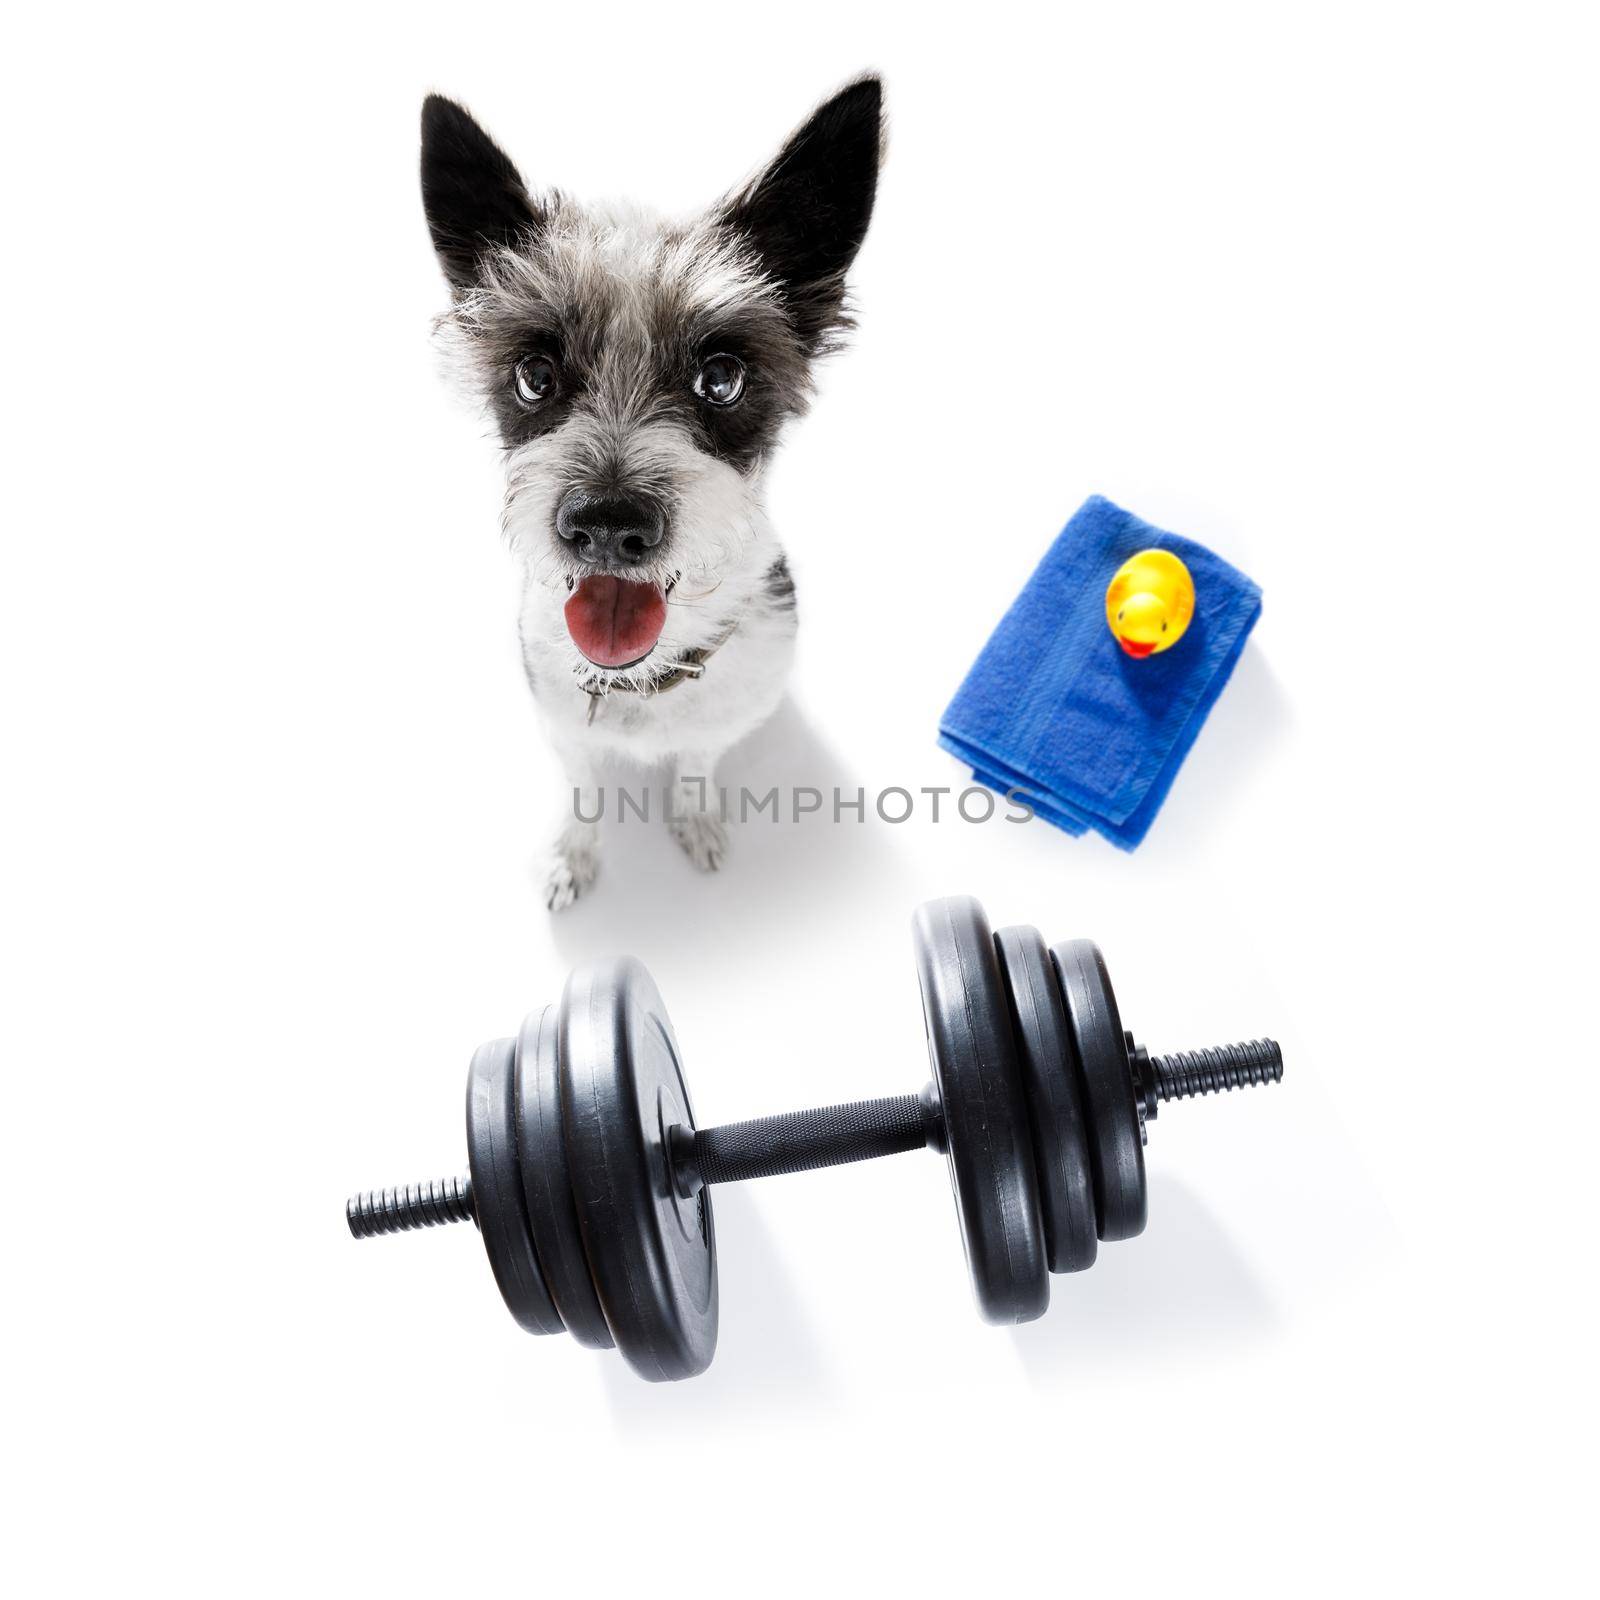 poodle dog with guilty conscience  for overweight, and to loose weight ,  on white background with  a dumbbell